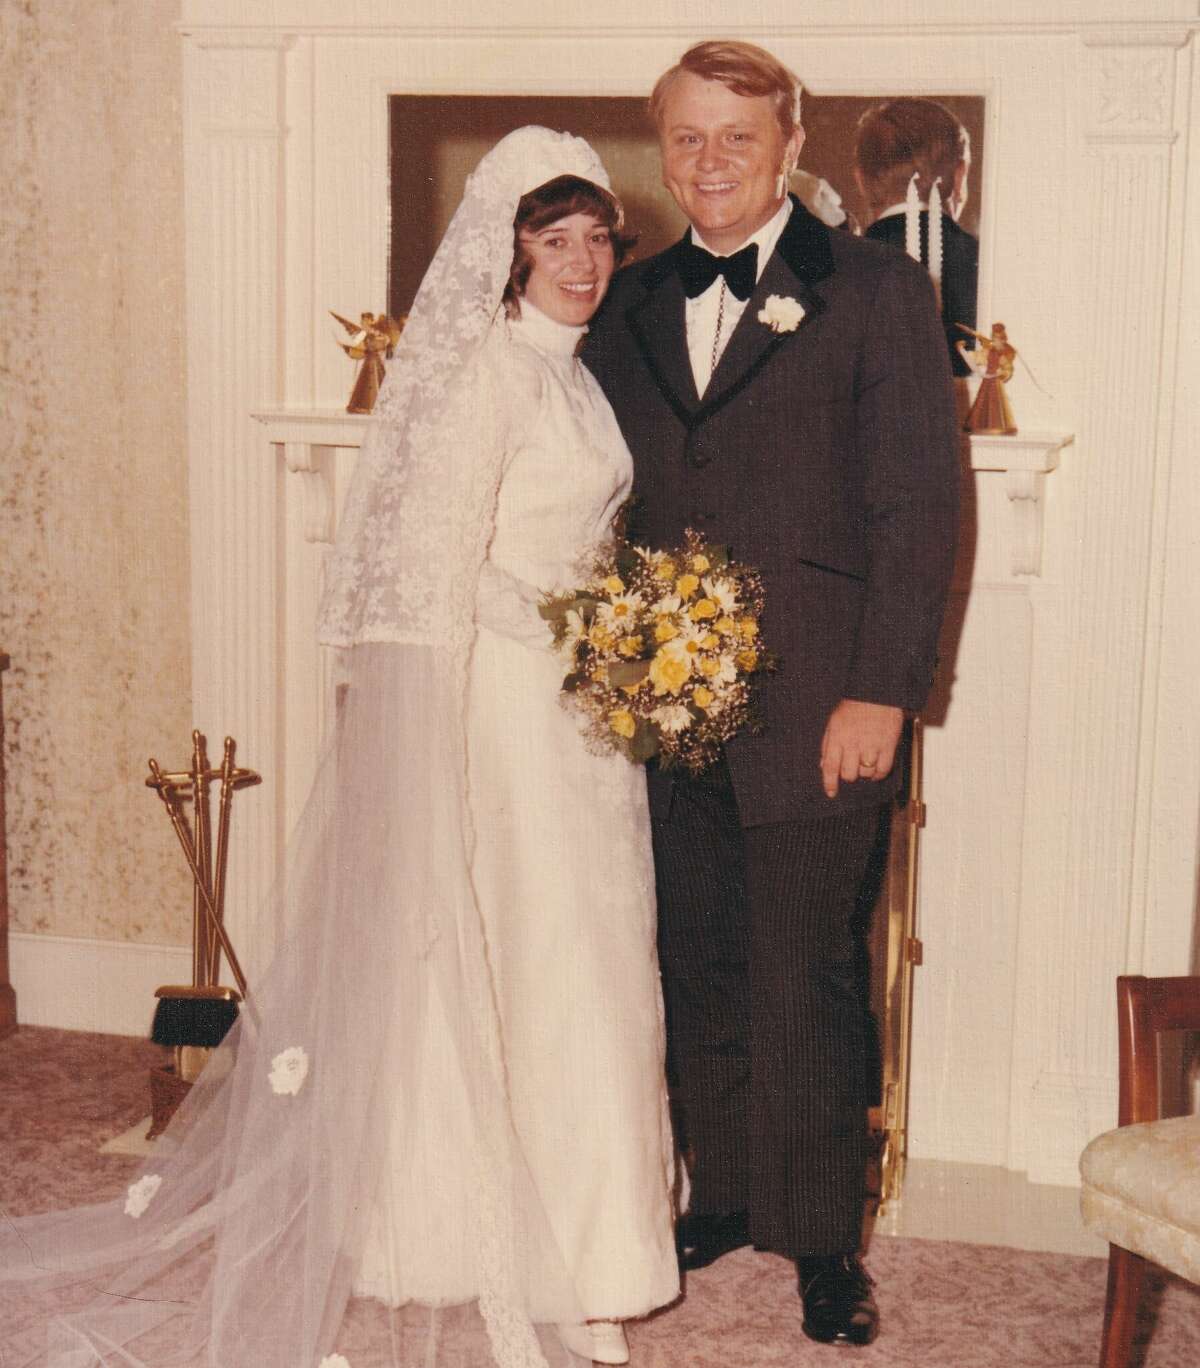 Gerry and Vera LeClaire at their wedding